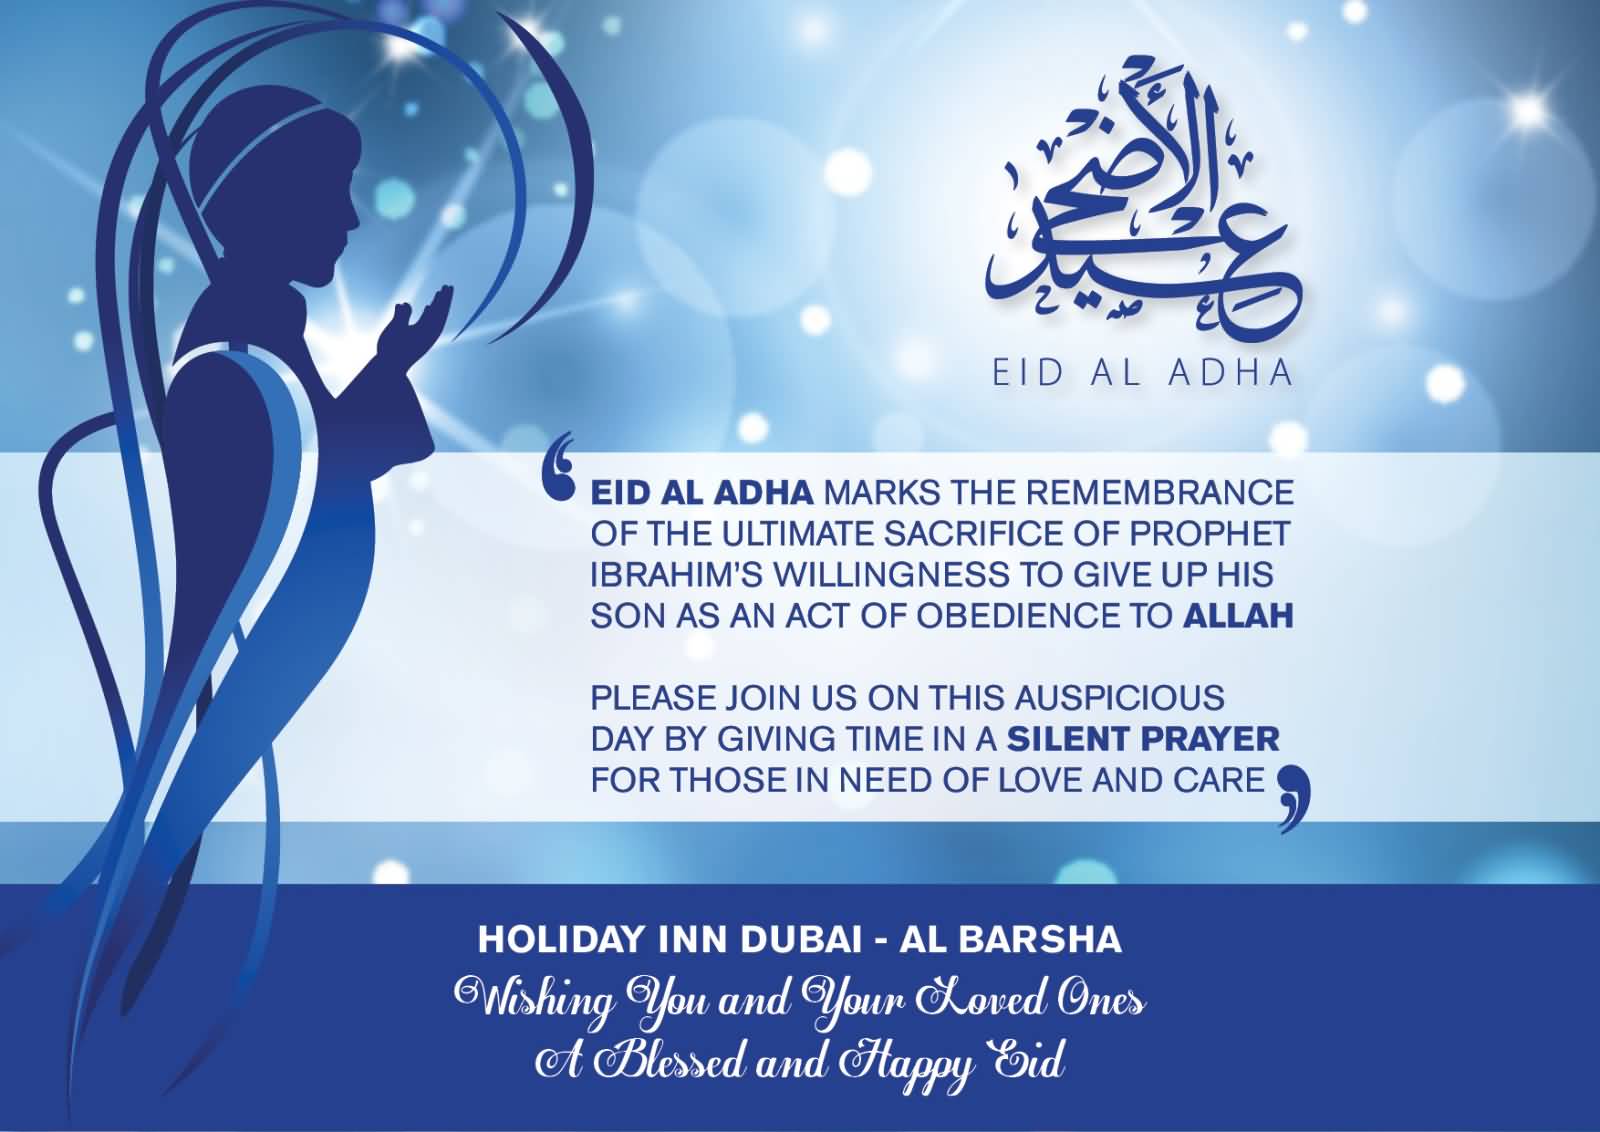 Wishing You And Your Loved Ones A Blessed And Happy Eid Al-Adha